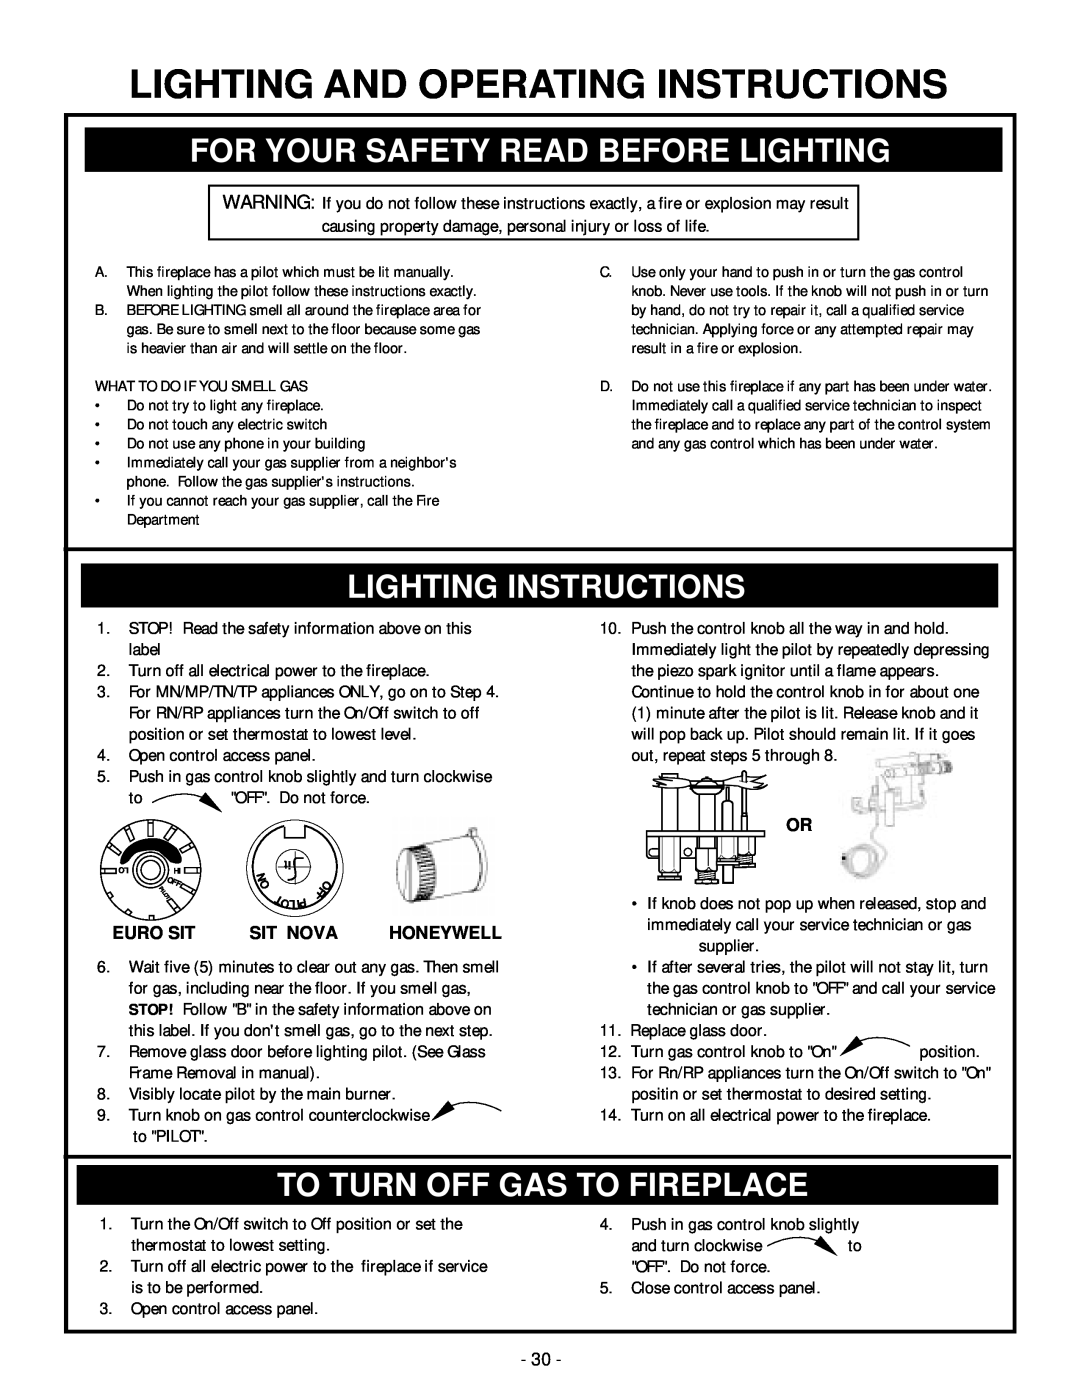 Vermont Casting BHDR36 For Your Safety Read Before Lighting, Lighting Instructions, To Turn Off Gas To Fireplace 